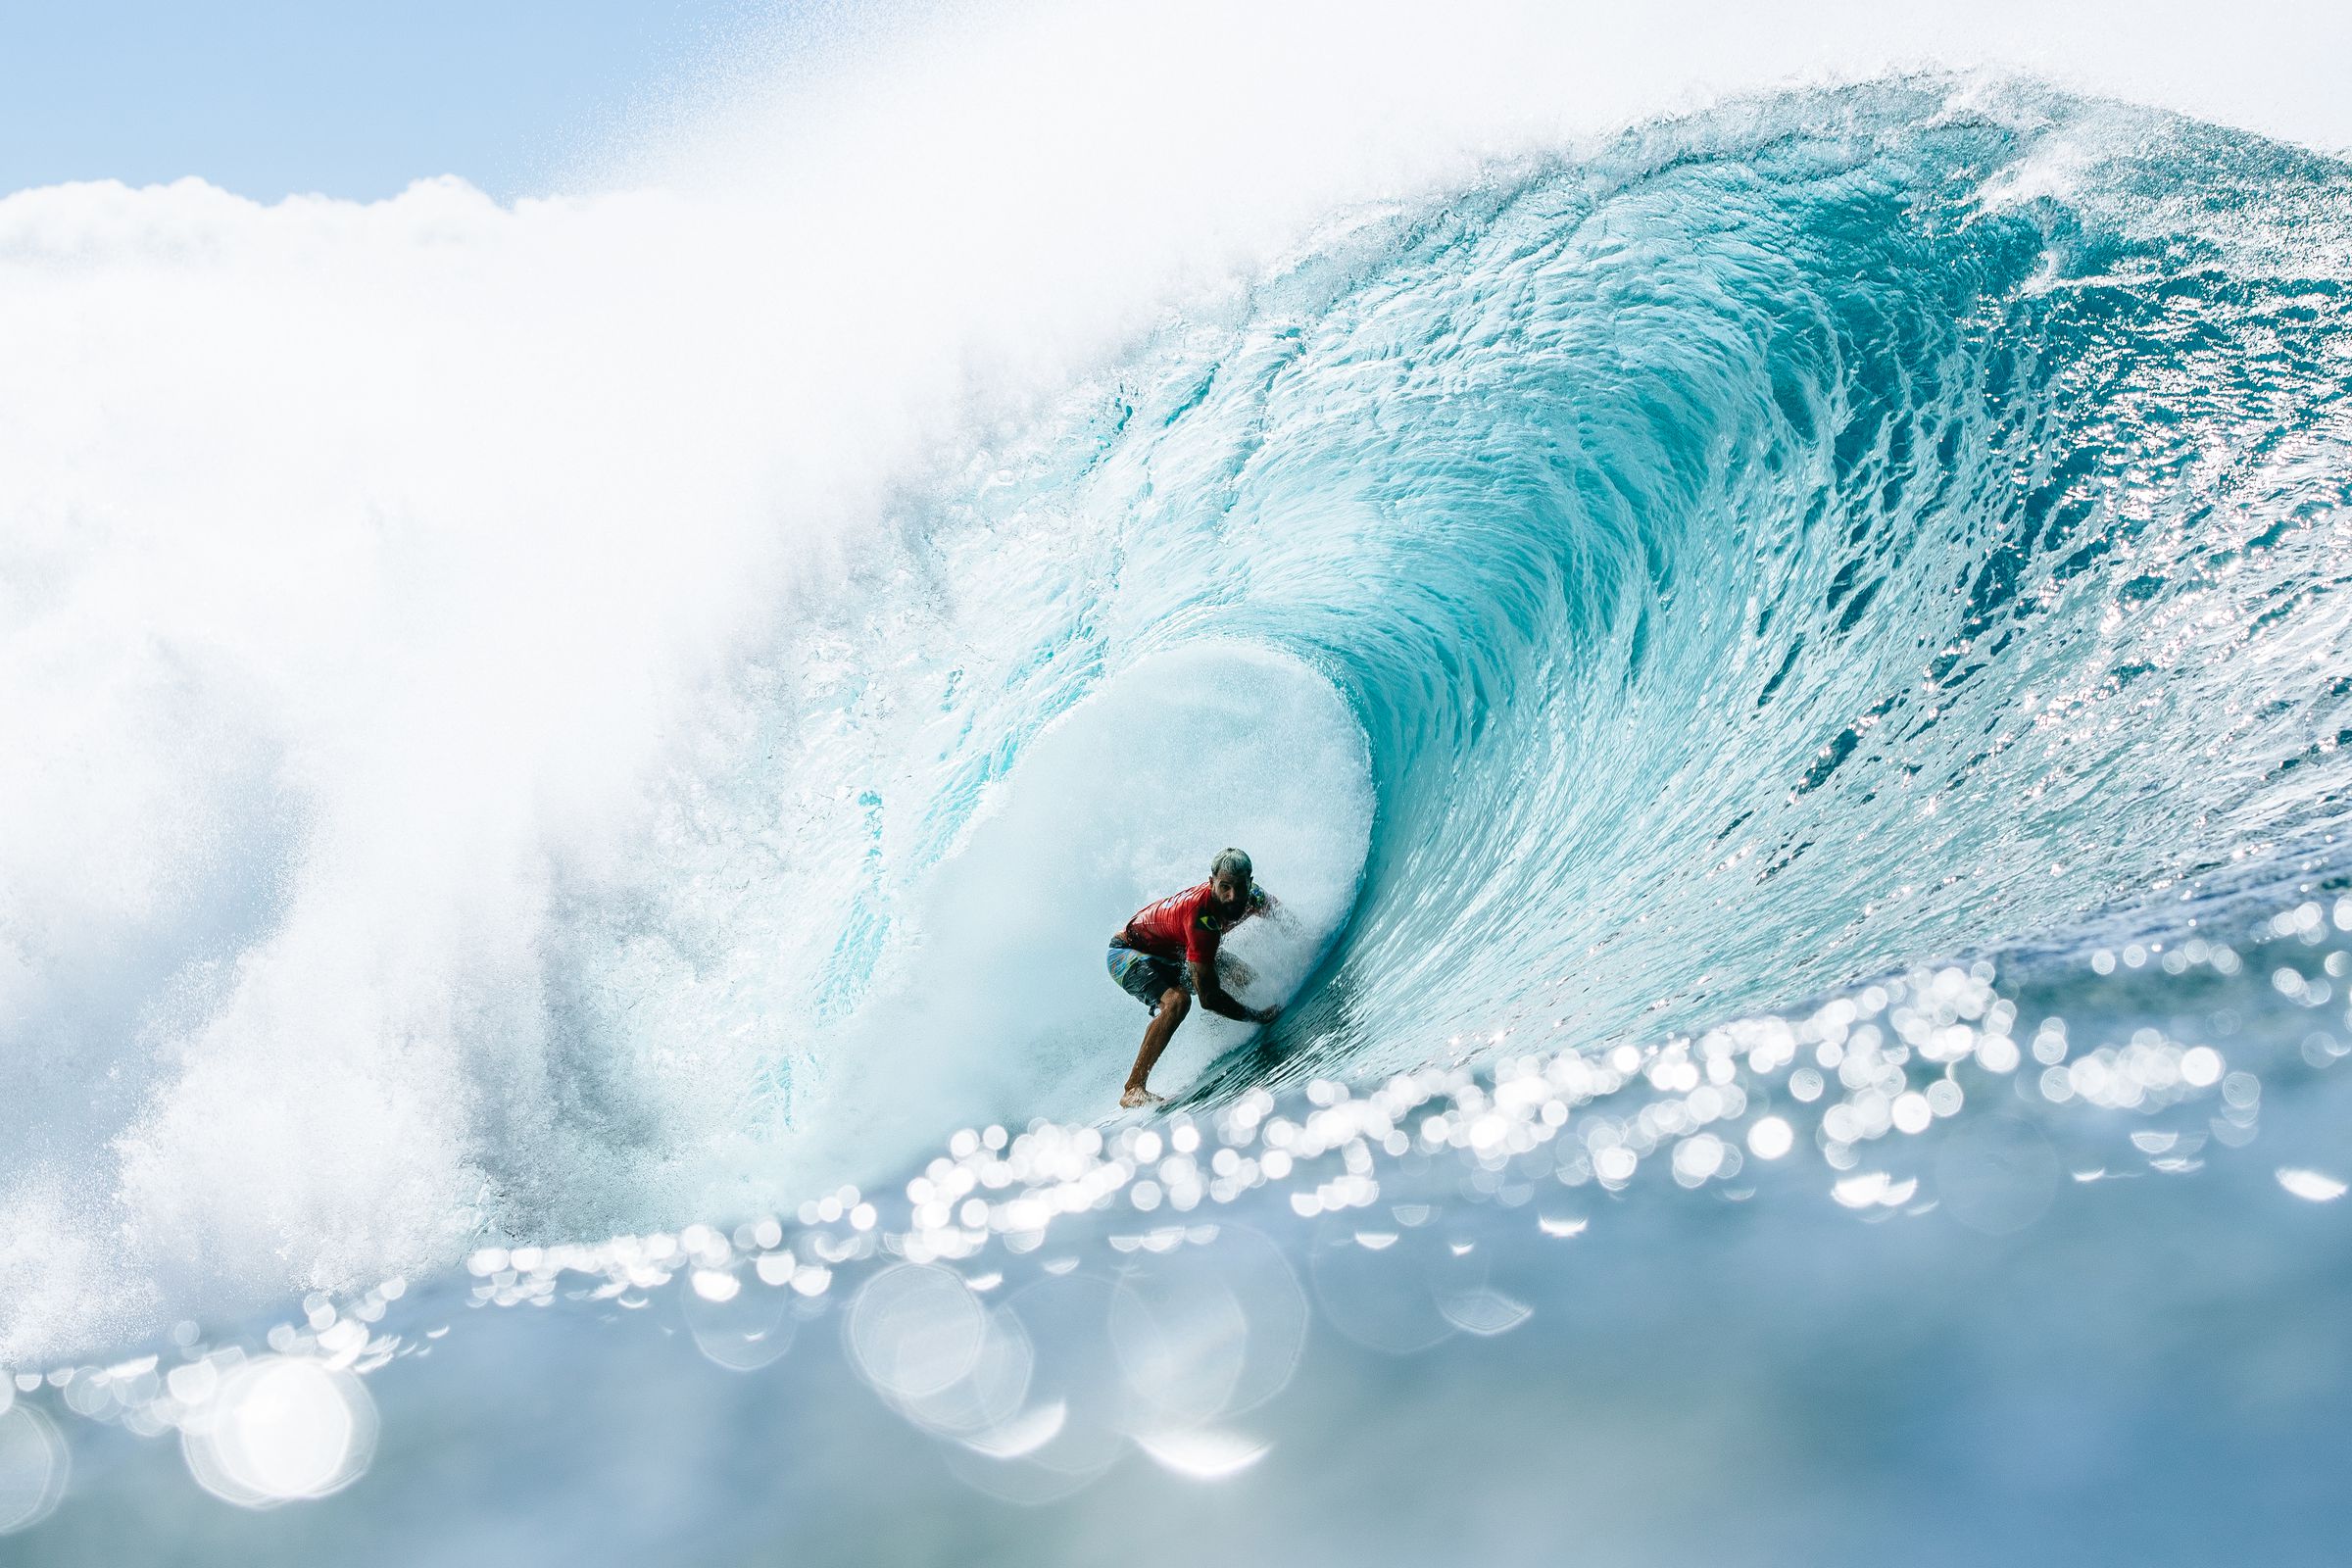 Brazil’s Ítalo Ferreira surfing in the middle of a pipeline wave